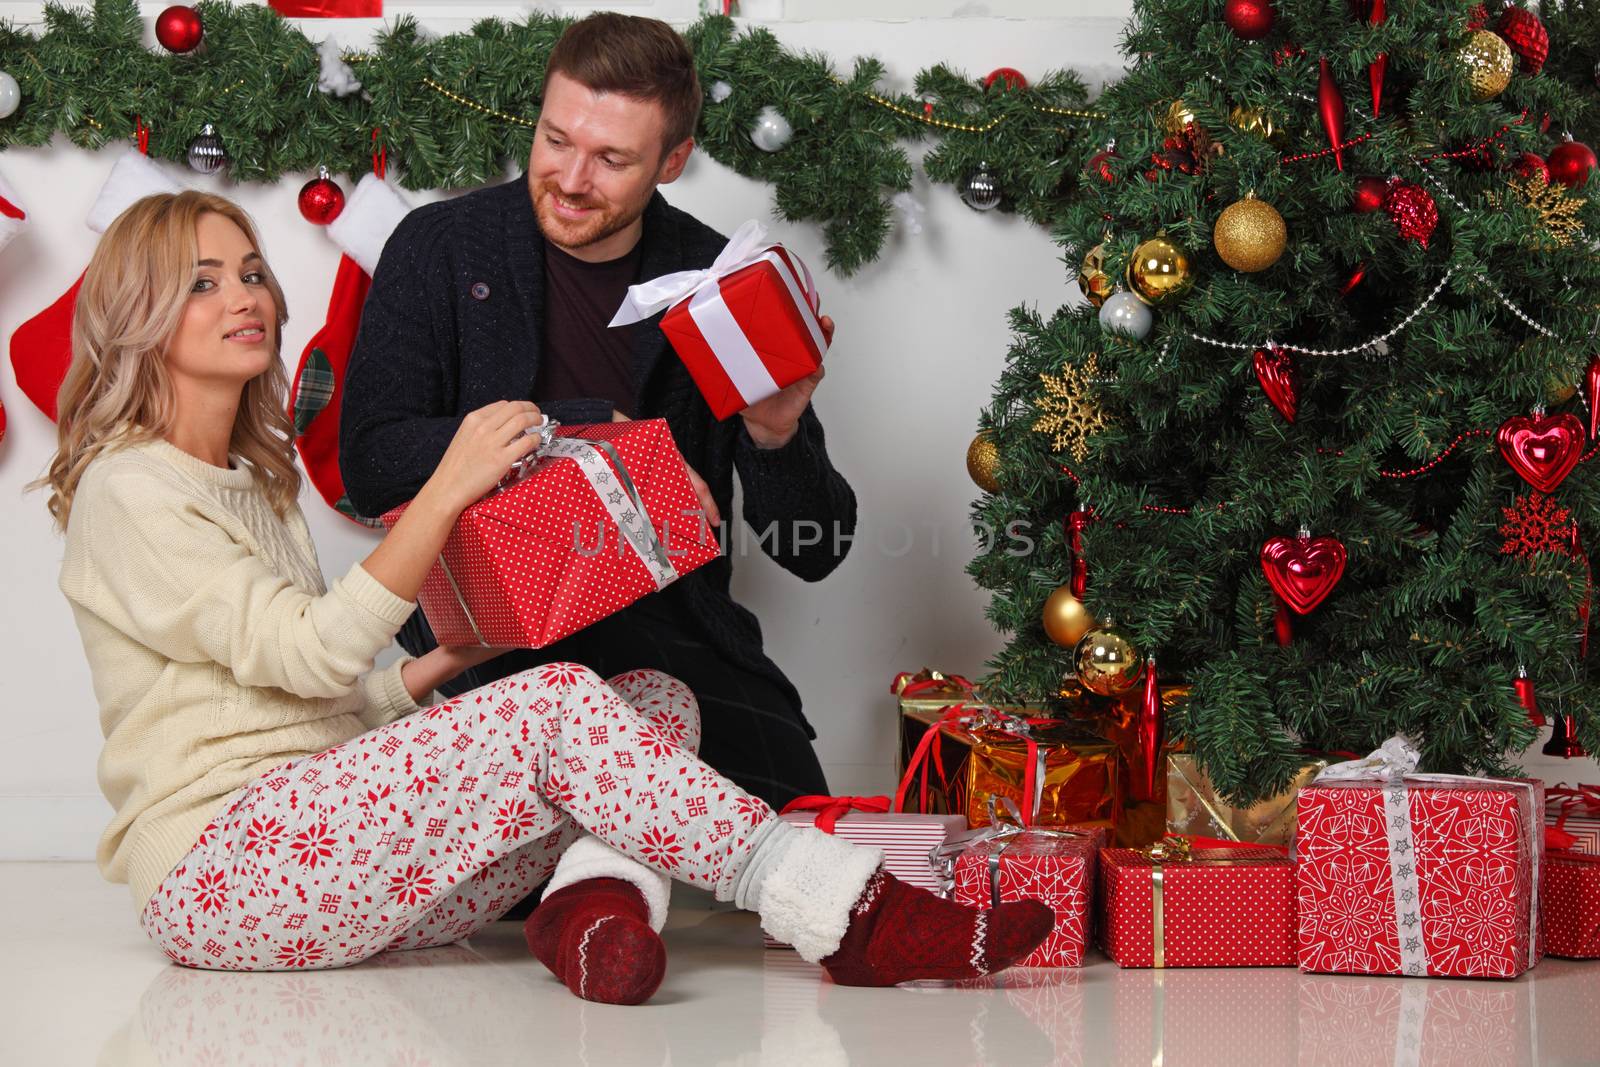 Couple in love sitting next to a nicely decorated Christmas tree, hloding Christmas gifts and smiling